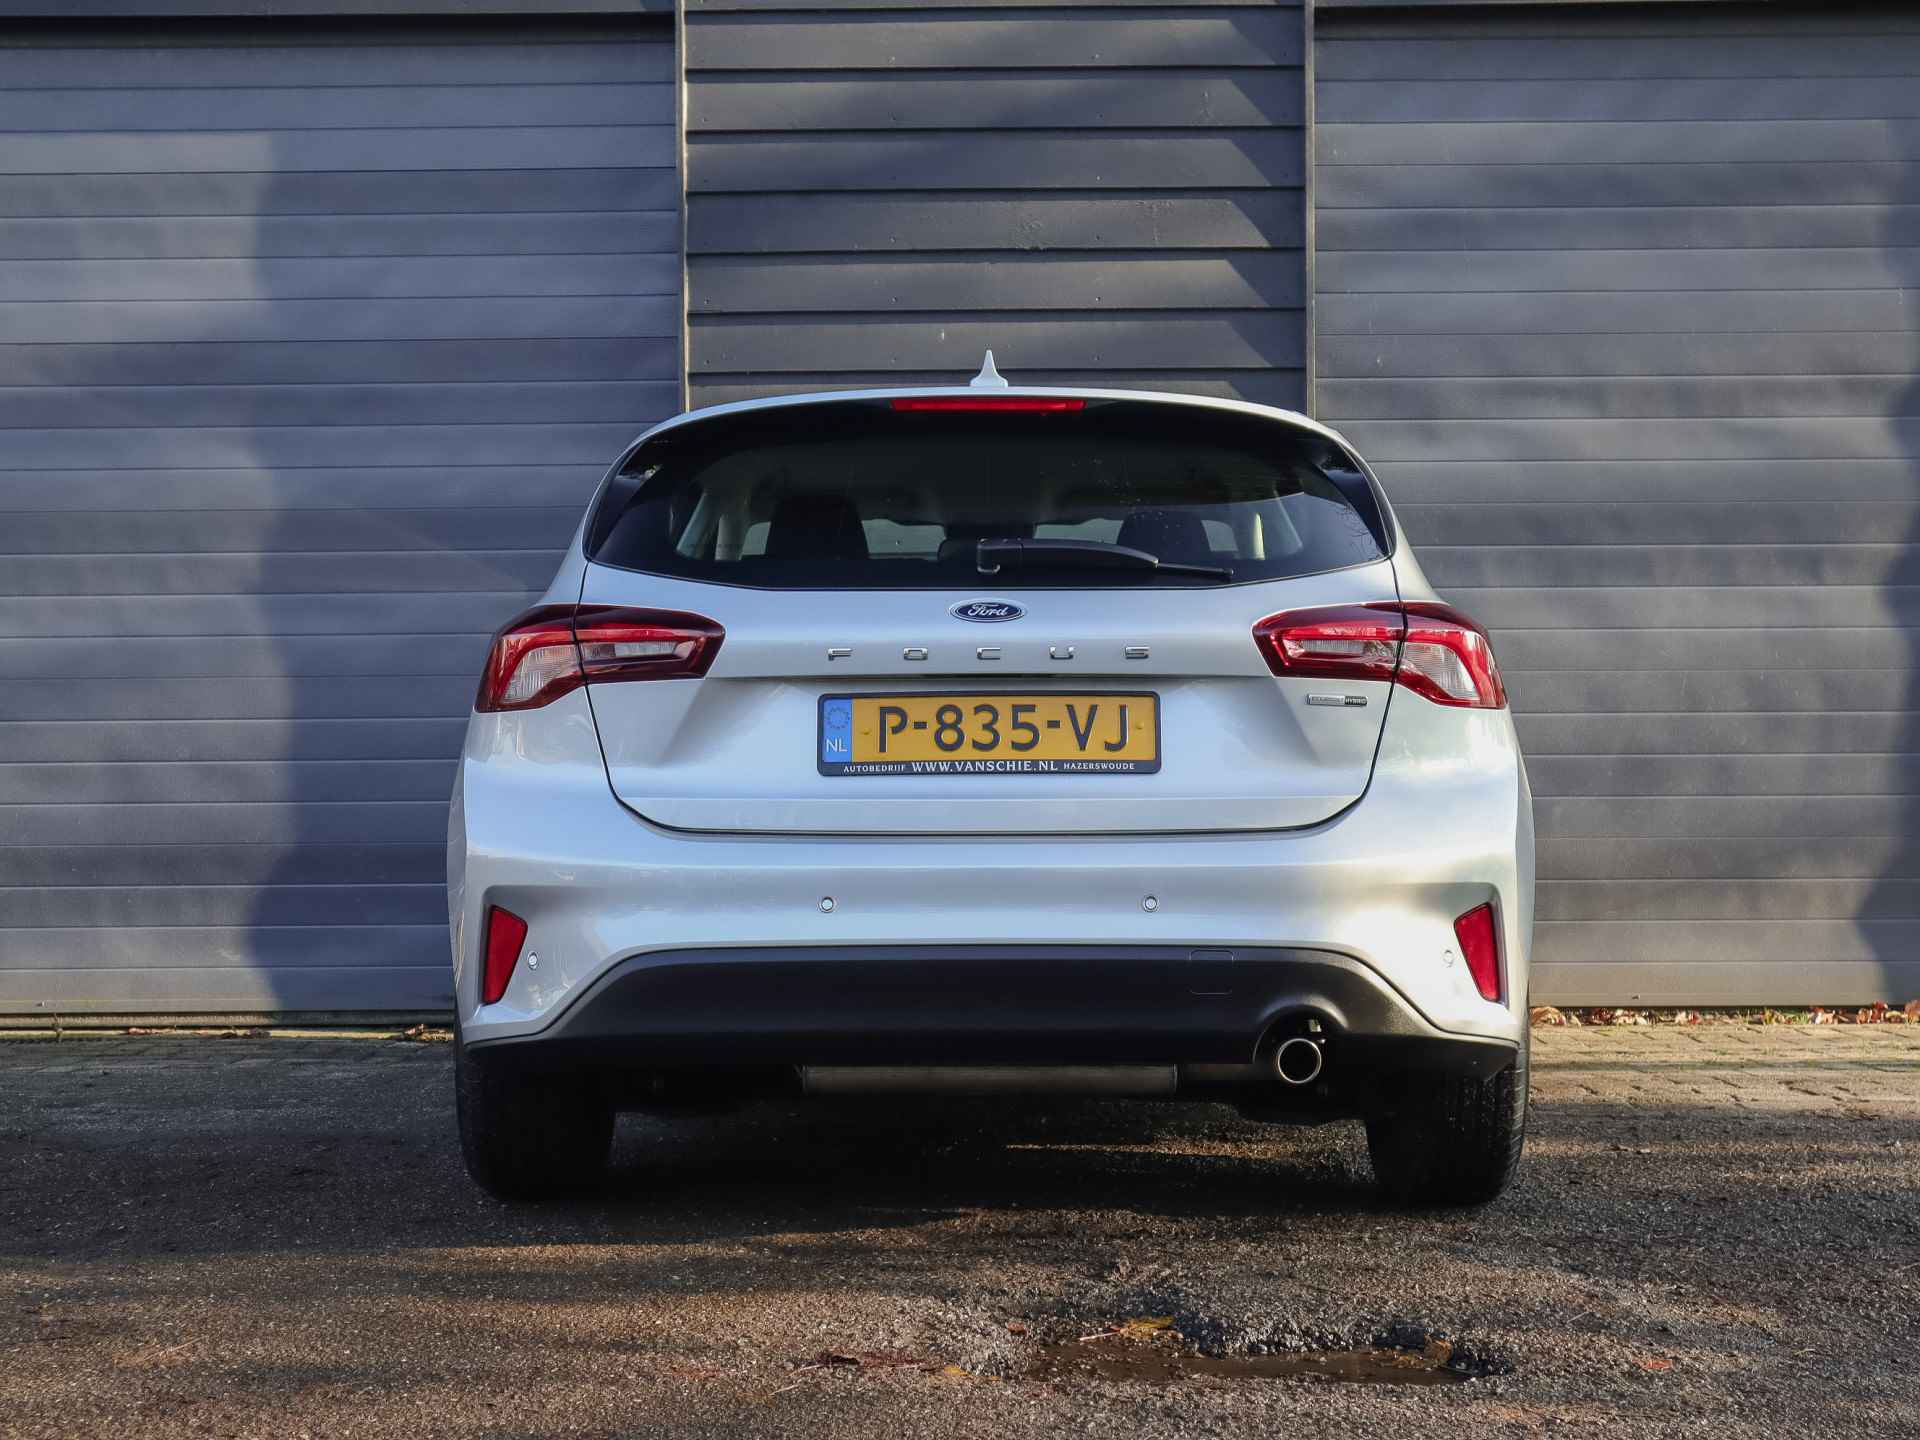 Ford Focus 1.0i Hybrid Connected, (149PK) 1e-Eig, Ford-Dealer-Onderh, 12-Mnd-BOVAG, NL-Auto, Navigatie/Apple-Carplay/Android-Auto, Parkeersensoren-V+A, Cruise-Control, Airco, DAB, Lane-Assist, Privacy-Glas, Sportstoelen, Led-Koplampen, Adaptieve-Cruise-Control - 16/55